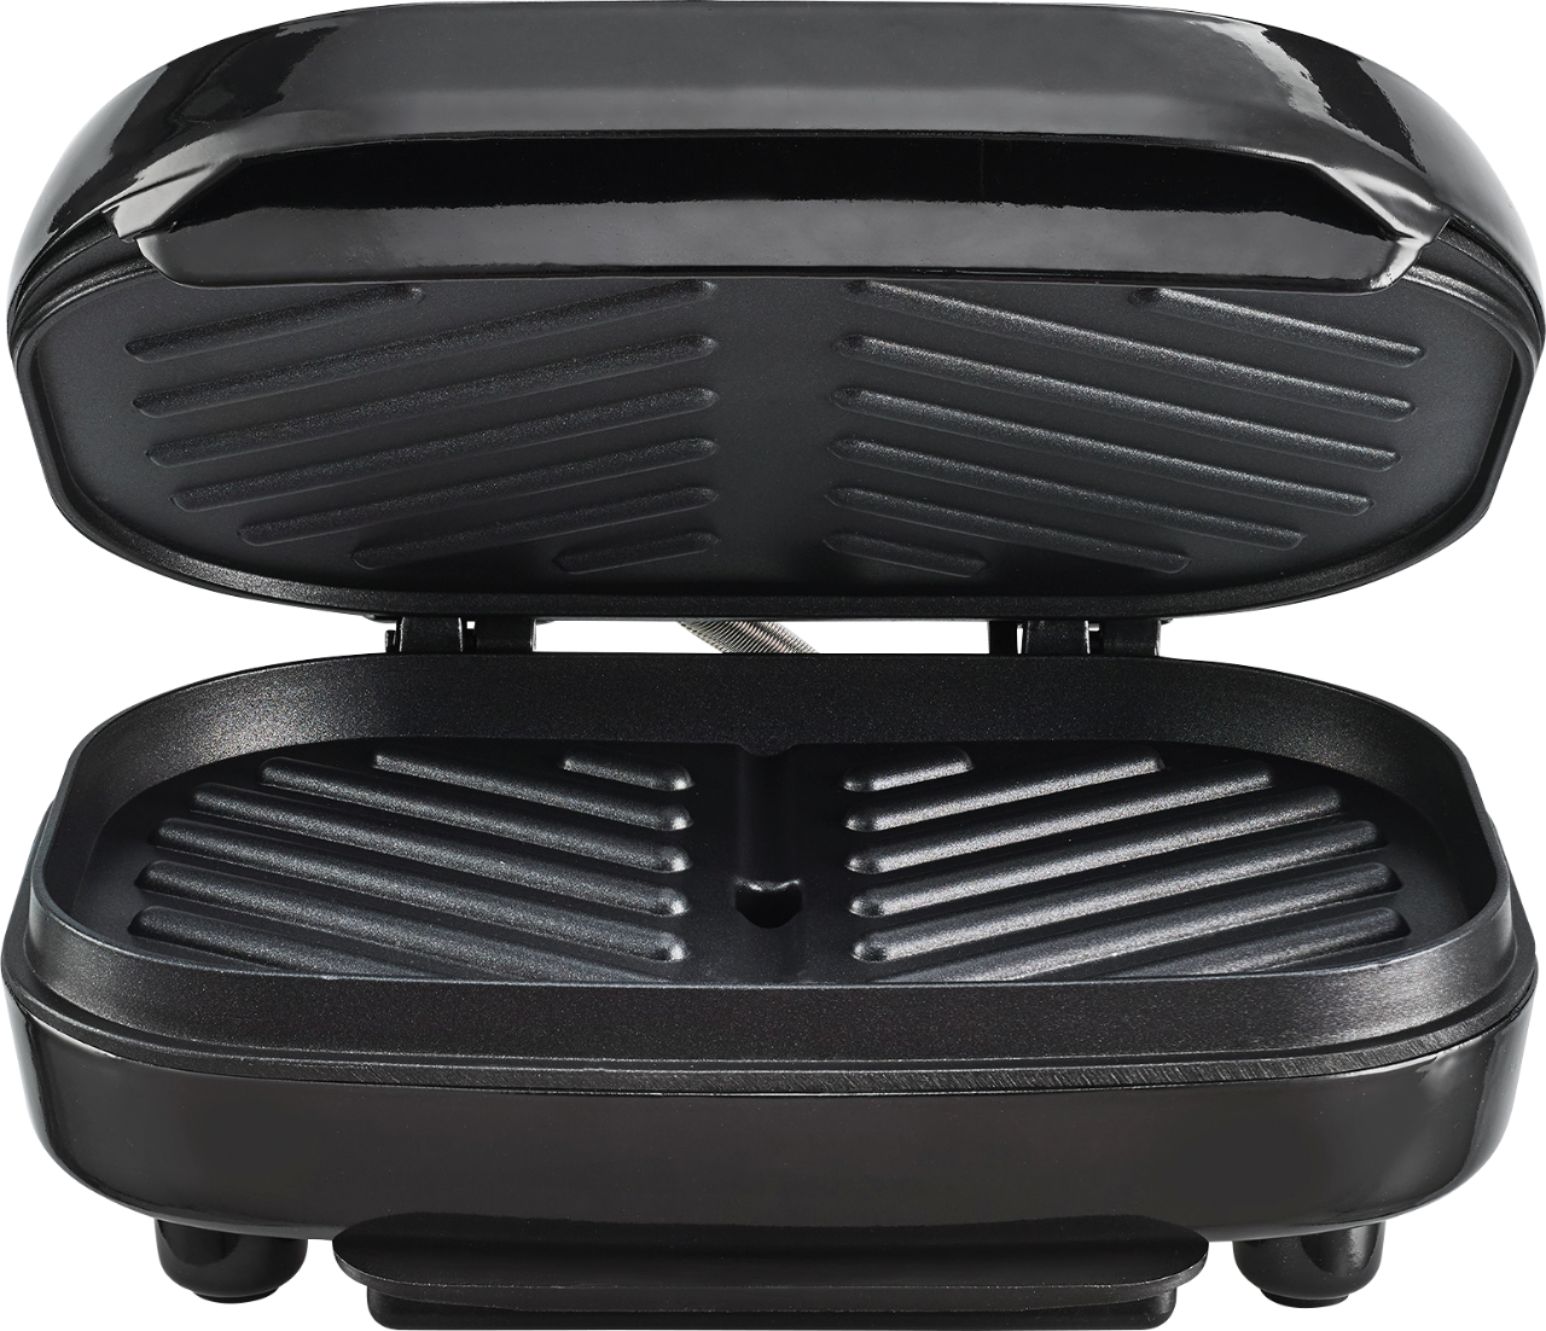 Bella – 2 Burger Electric Grill – Black – Just $9.99 at Best Buy